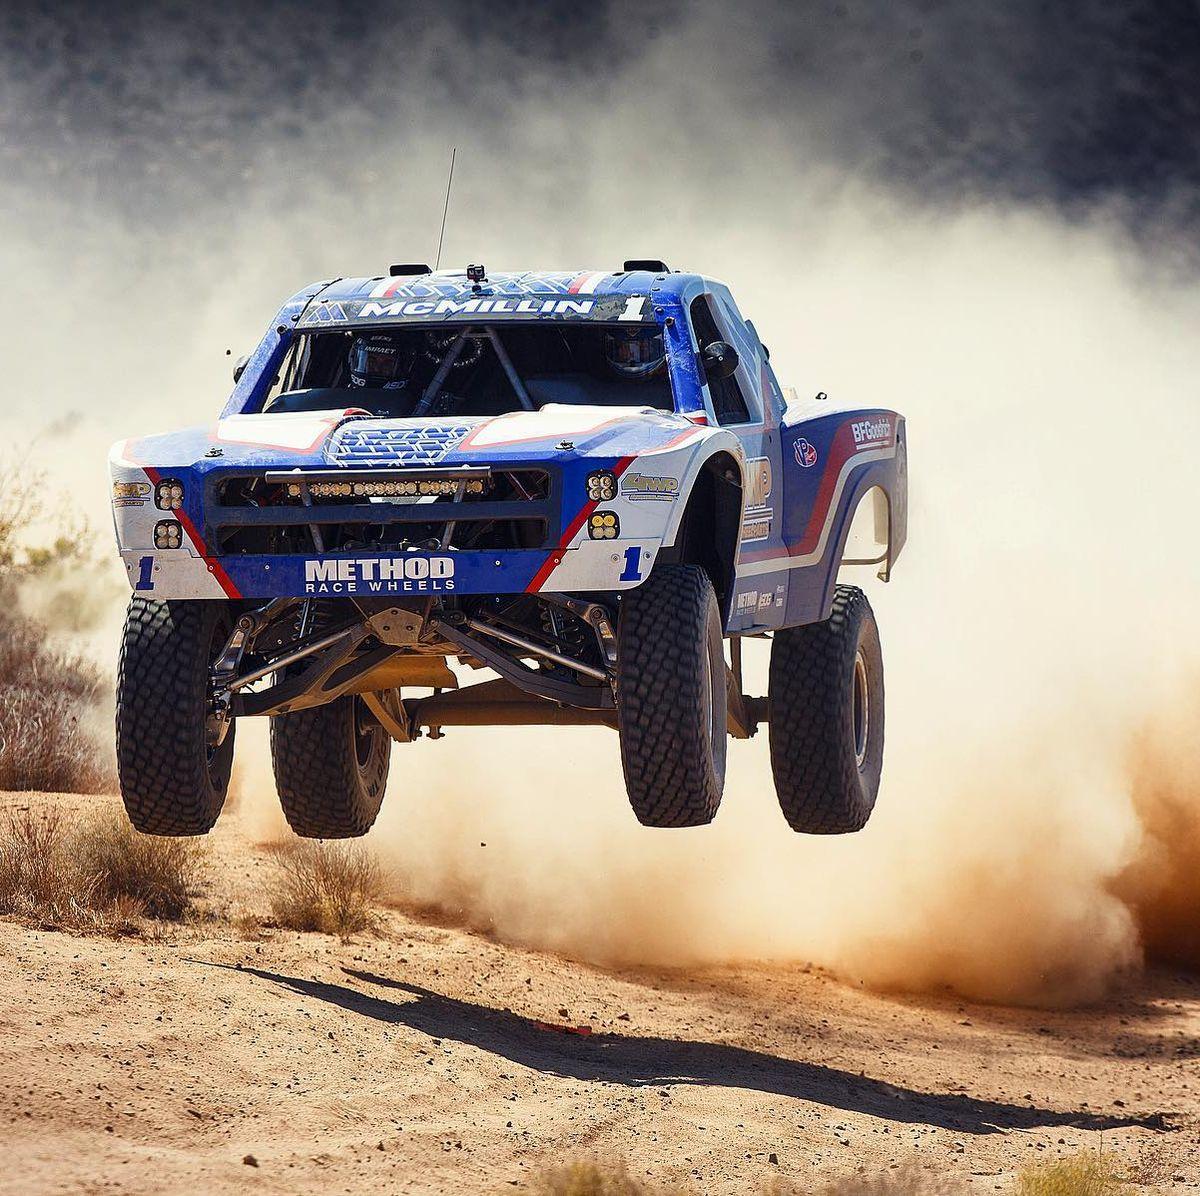 Racing Truck: Record-setting Off-road Races: Baja 1000 and More